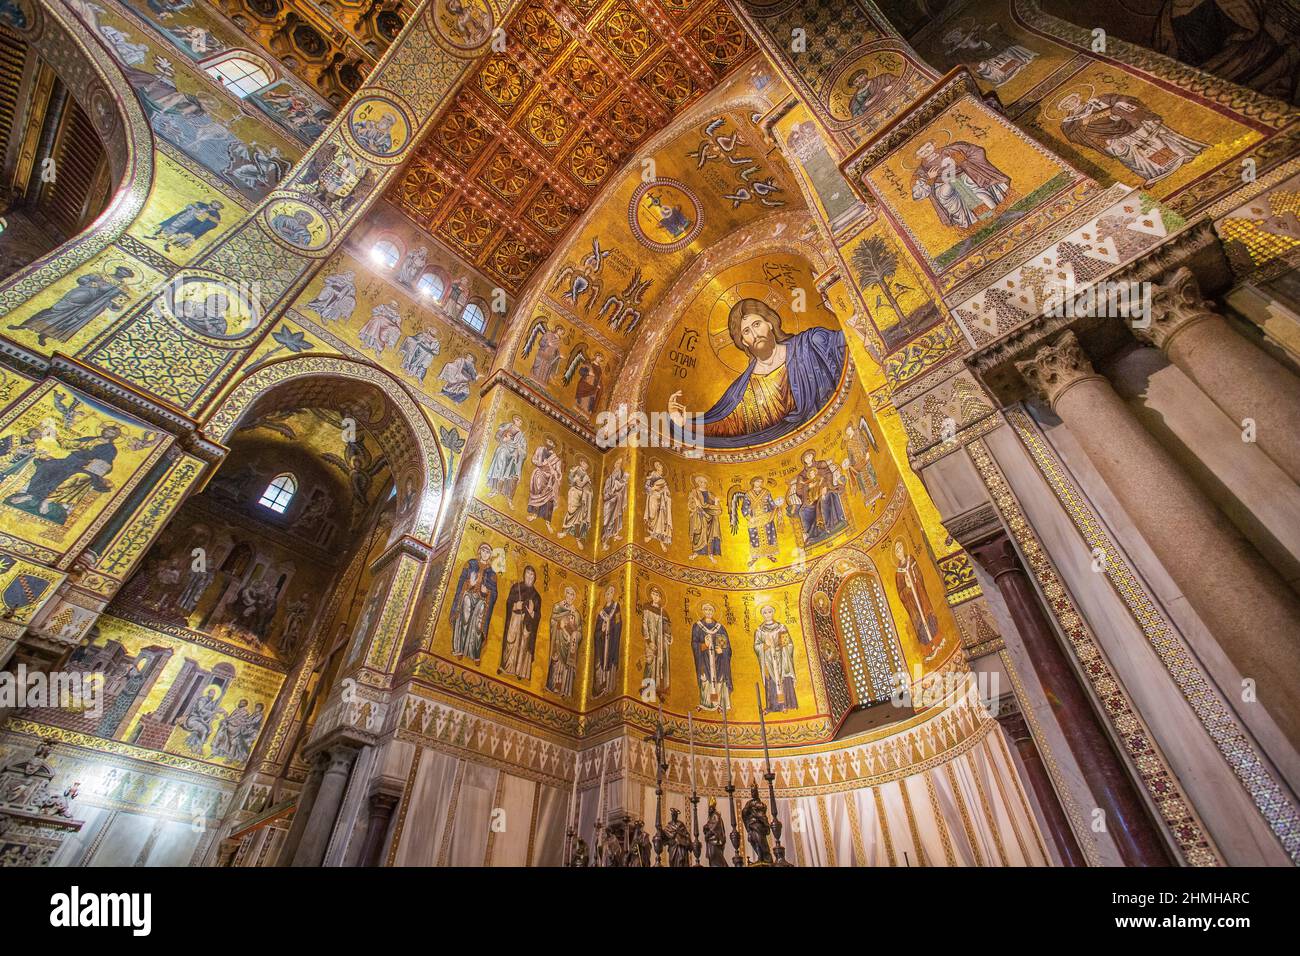 Interior of the cathedral with gold mosaics, Monreale, Sicily, Italy Stock Photo